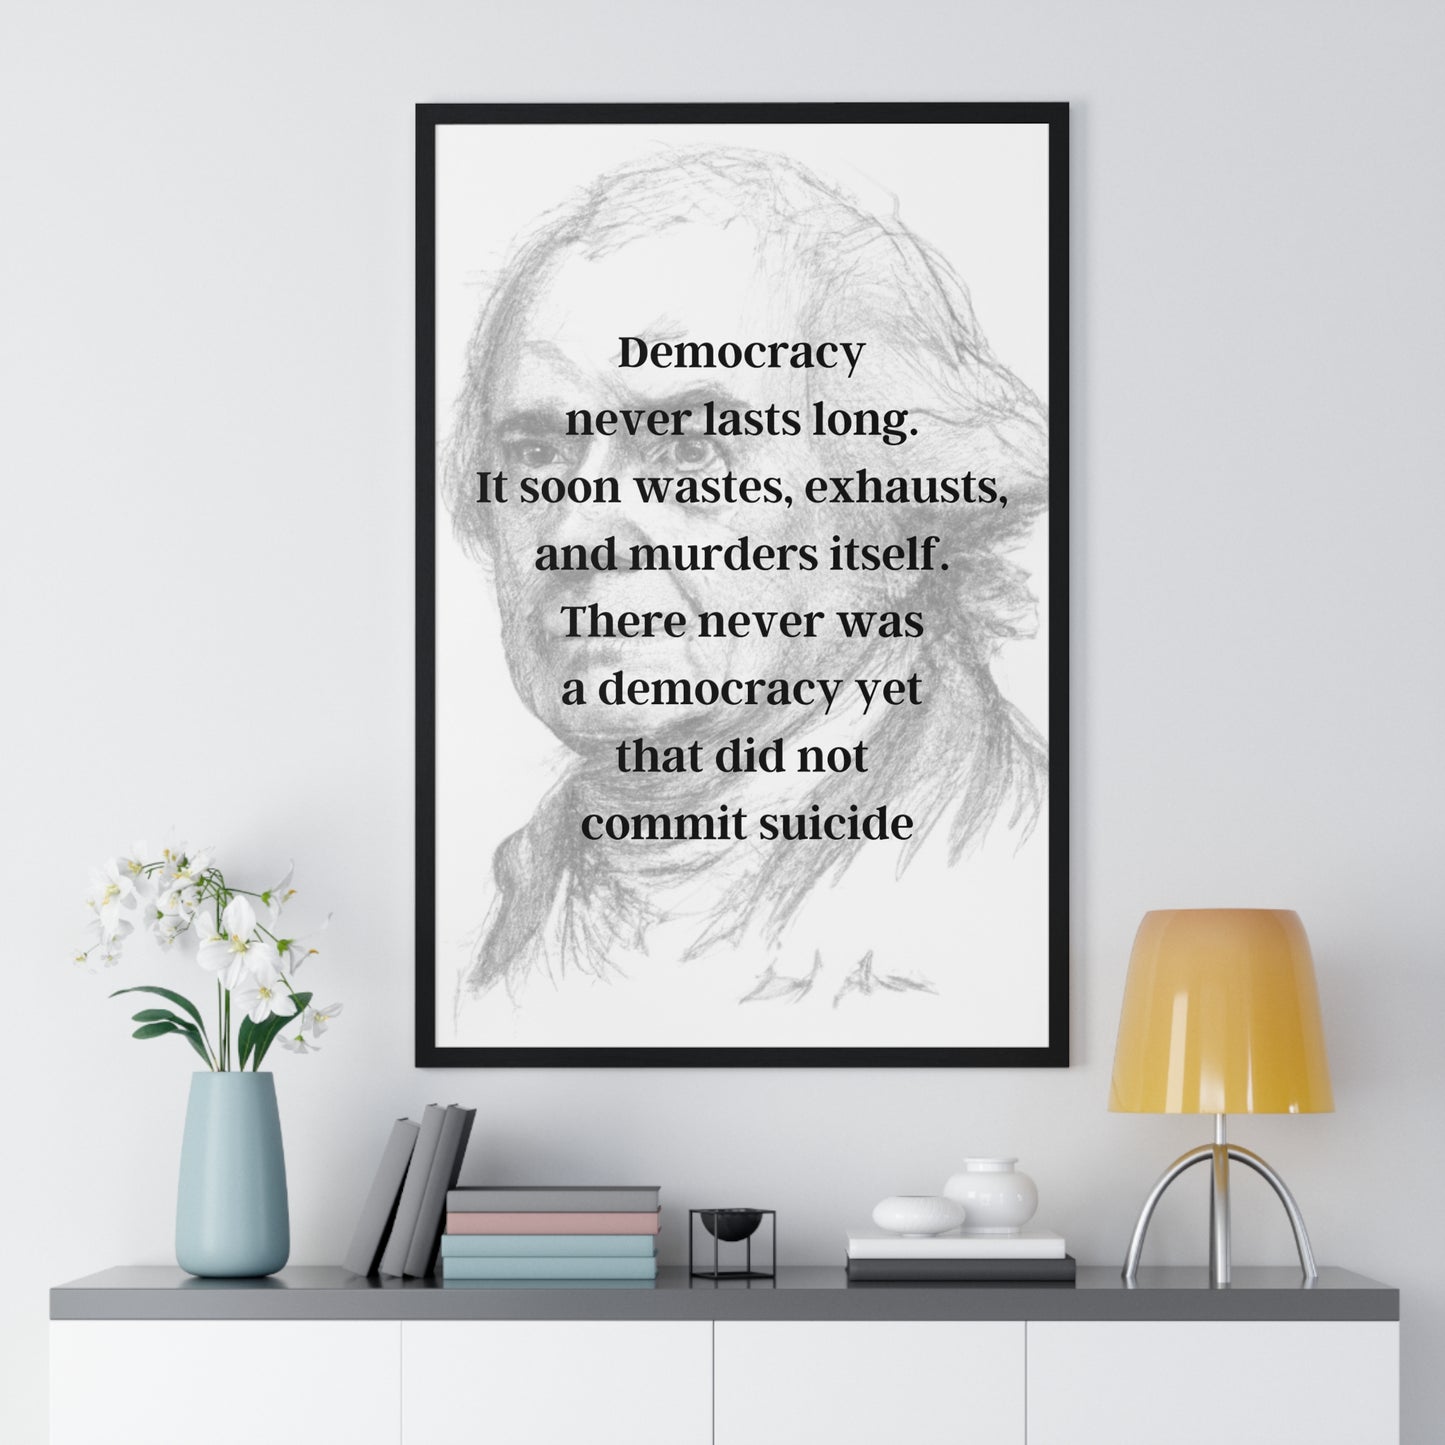 John Adams Quote 2, Poster Art, Light Print, 2nd President of the United States, American Patriots, AI Art, Political Art, Poster Prints, Presidential Portraits, Presidential Quotes, Inspirational Quotes